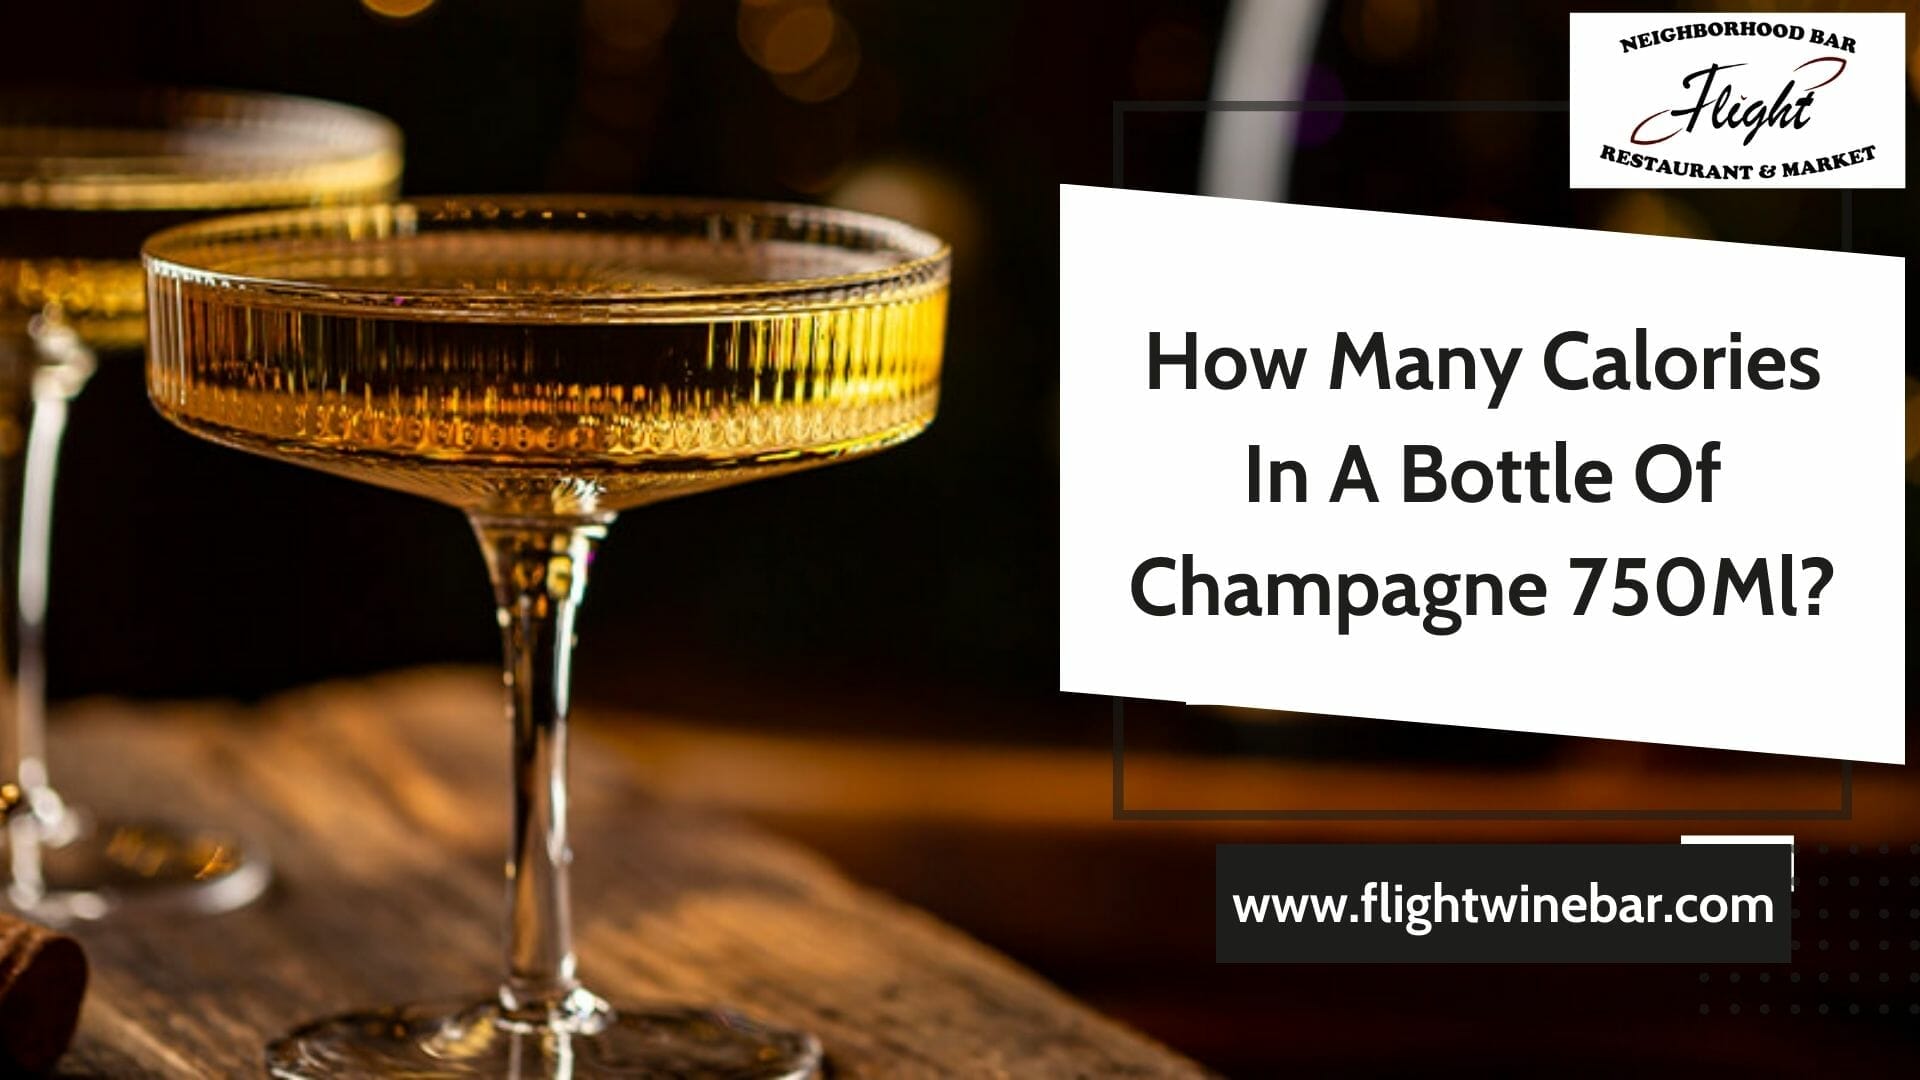 How Many Calories In A Bottle Of Champagne 750Ml